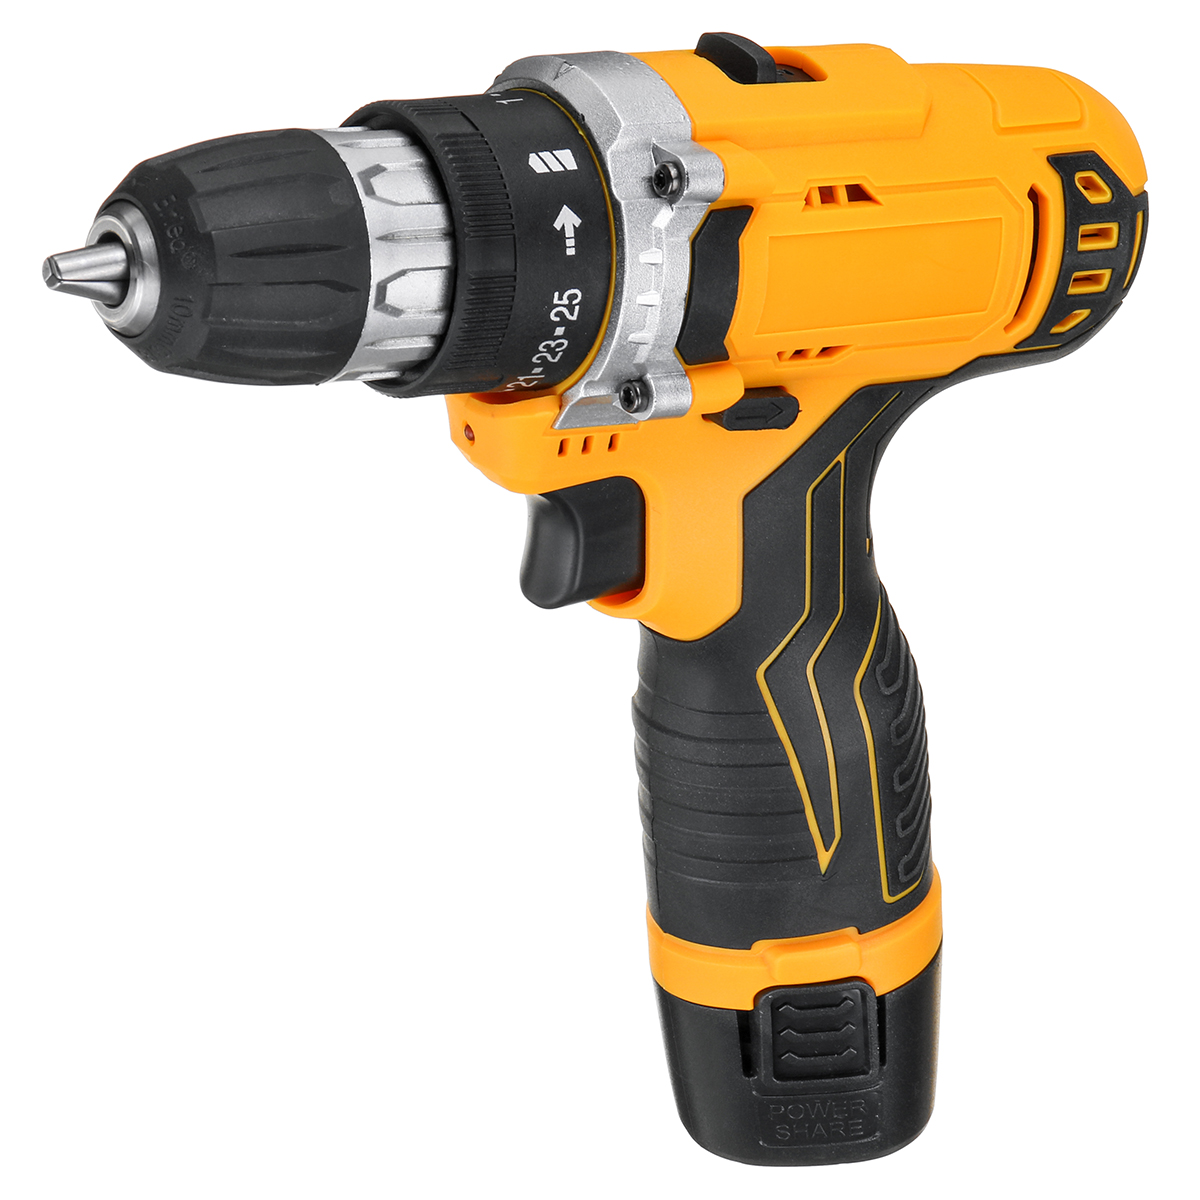 121821V-251-Torque-2-Speed-Cordless-Electric-Drill-Screwdriver-W-LED-Light-1733758-7